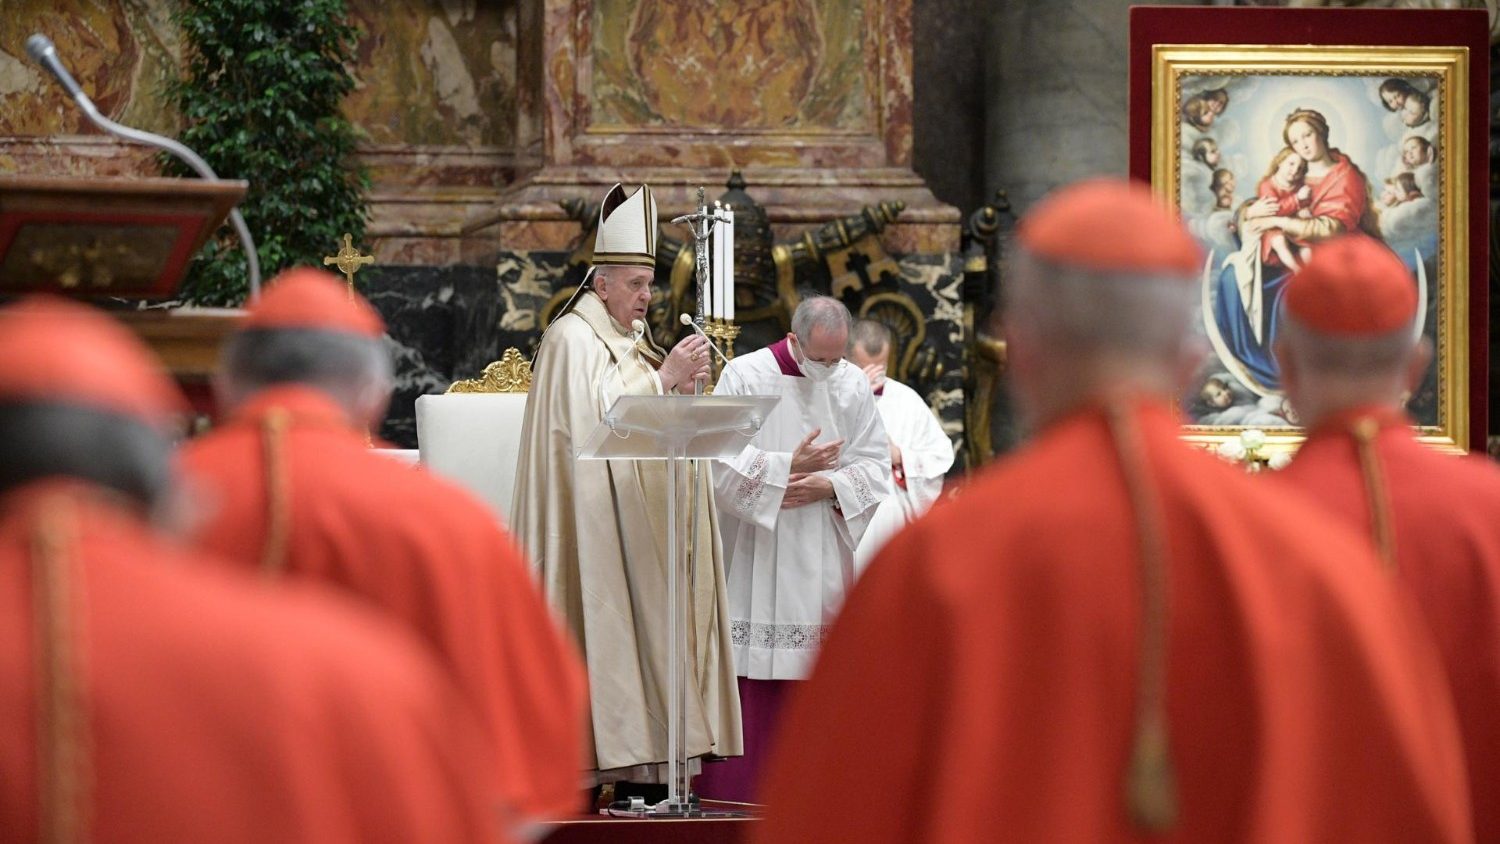 For tailor to popes and cardinals, a consistory is 'fashion week